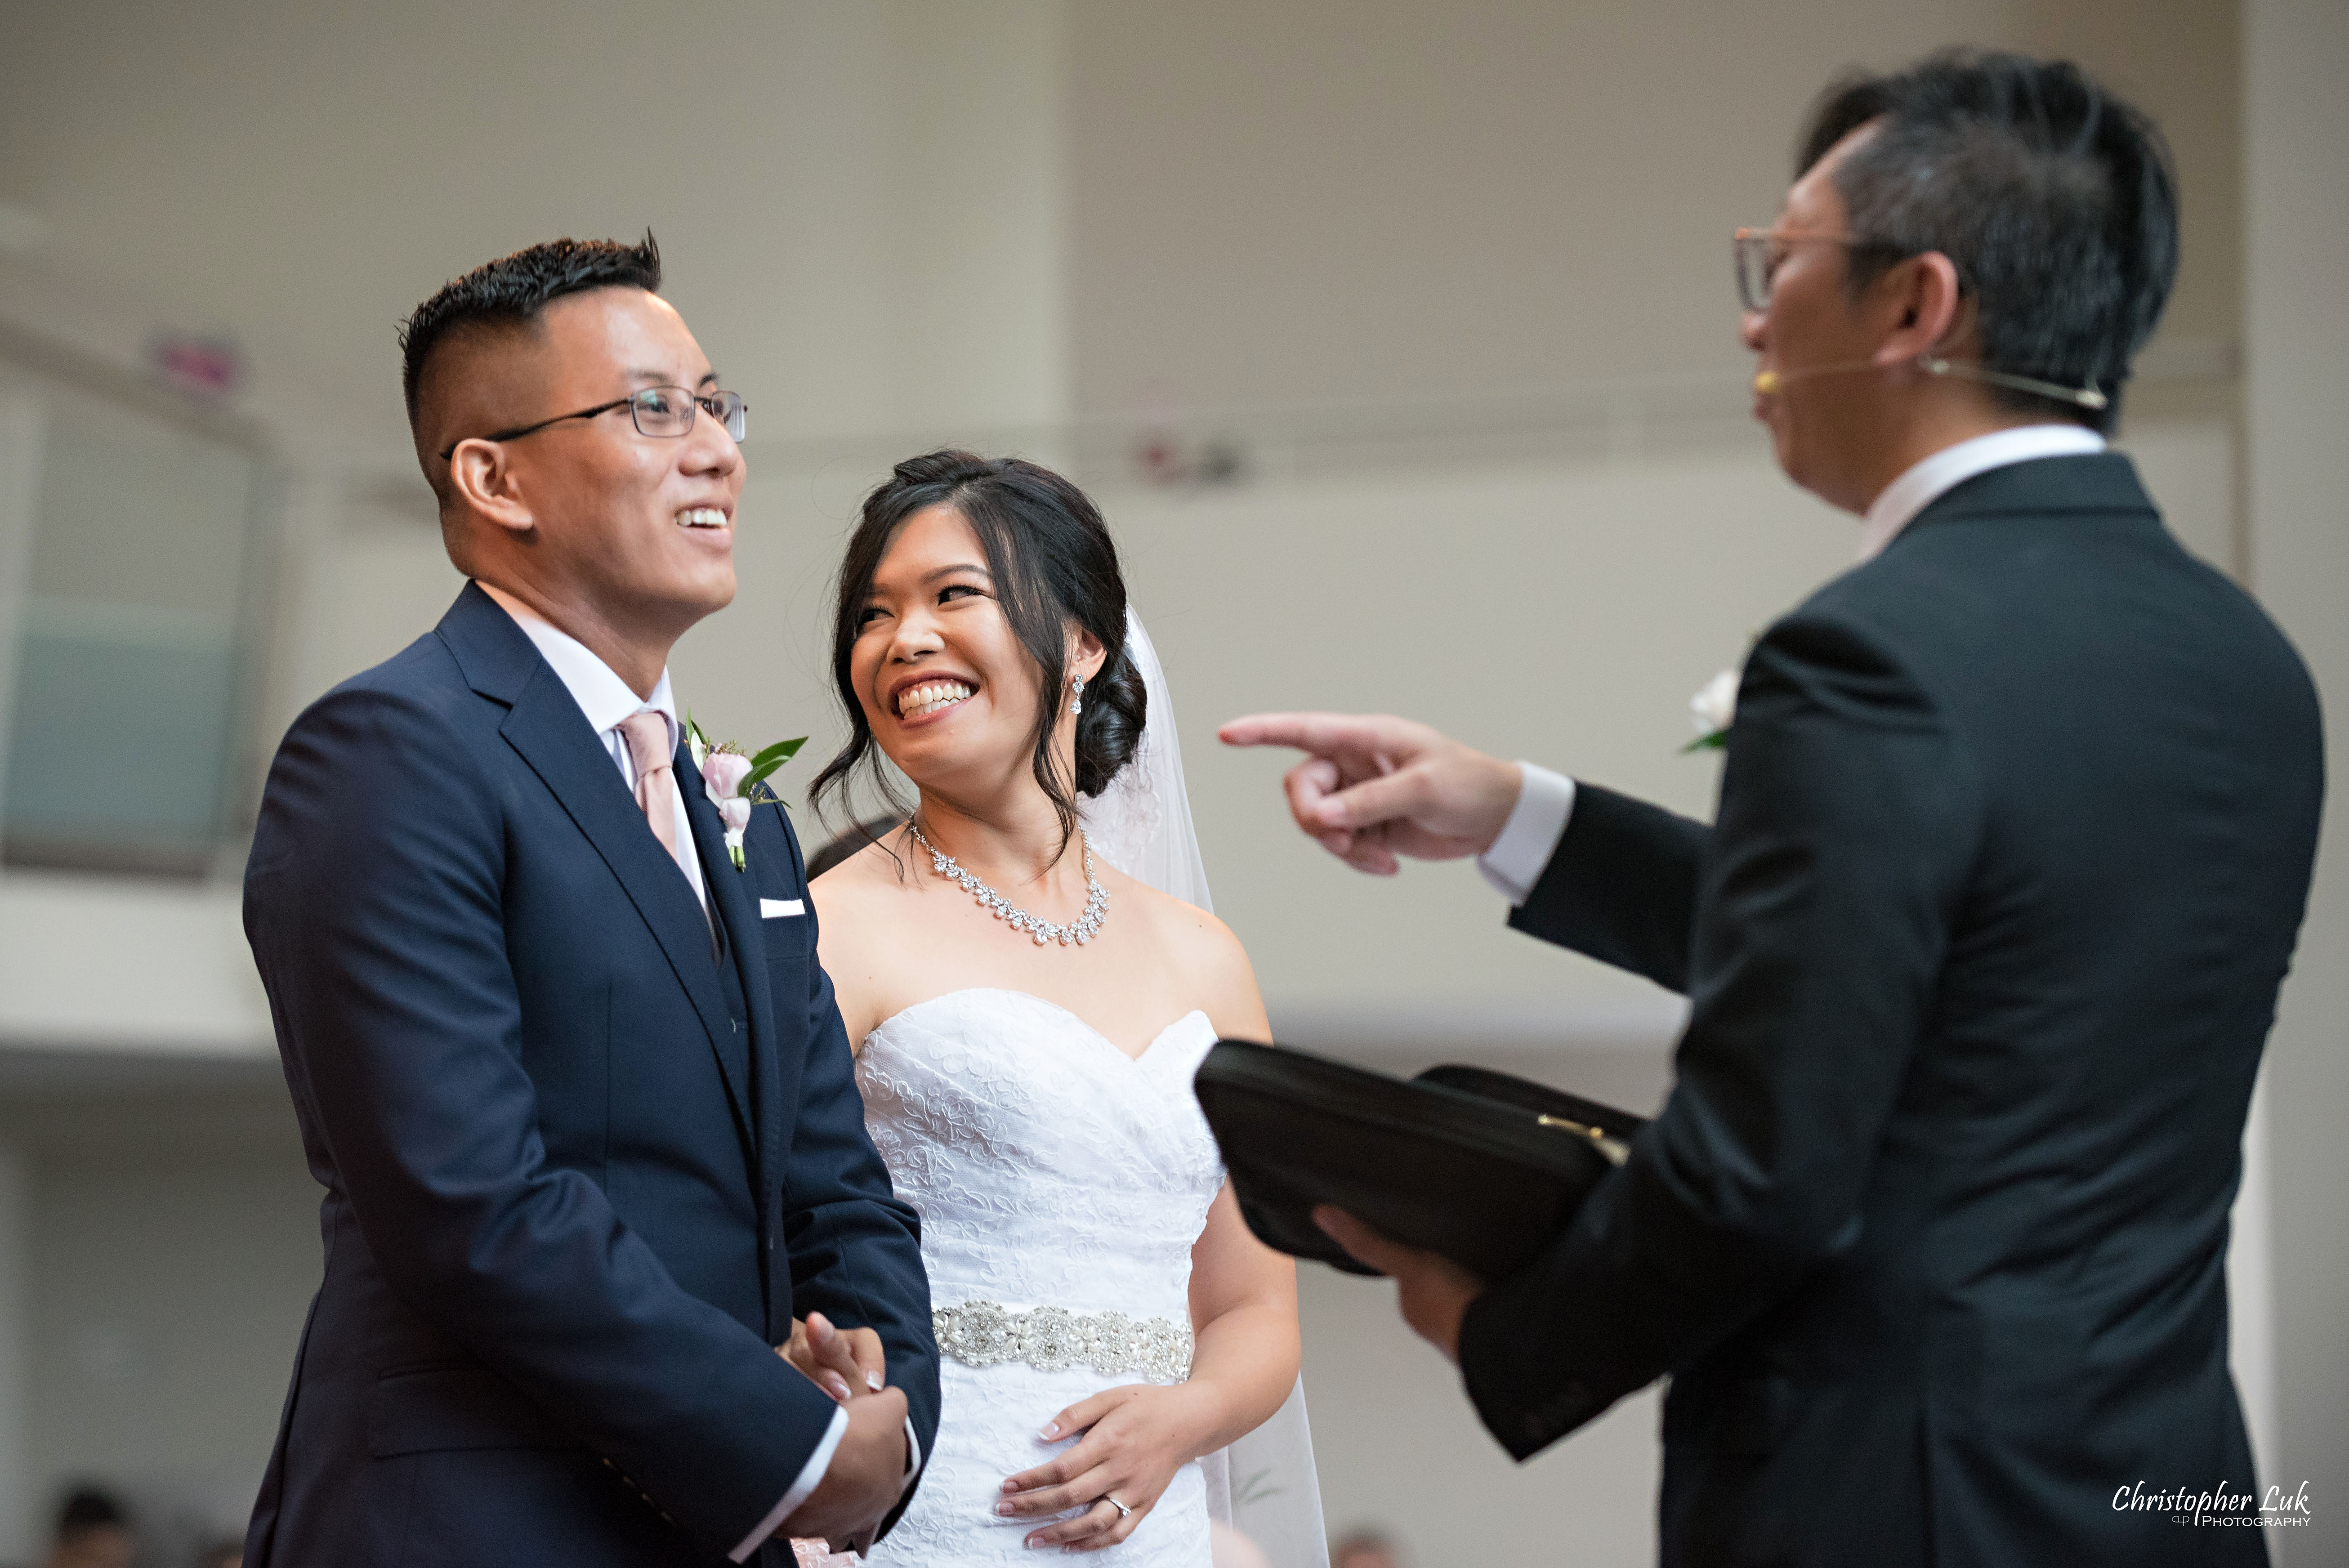 Christopher Luk - Toronto Wedding Photographer - Markham Chinese Baptist Church MCBC Christian Ceremony - Natural Candid Photojournalistic Bride Groom Exhortation Message Pastor Officiant Homily Reaction Laugh